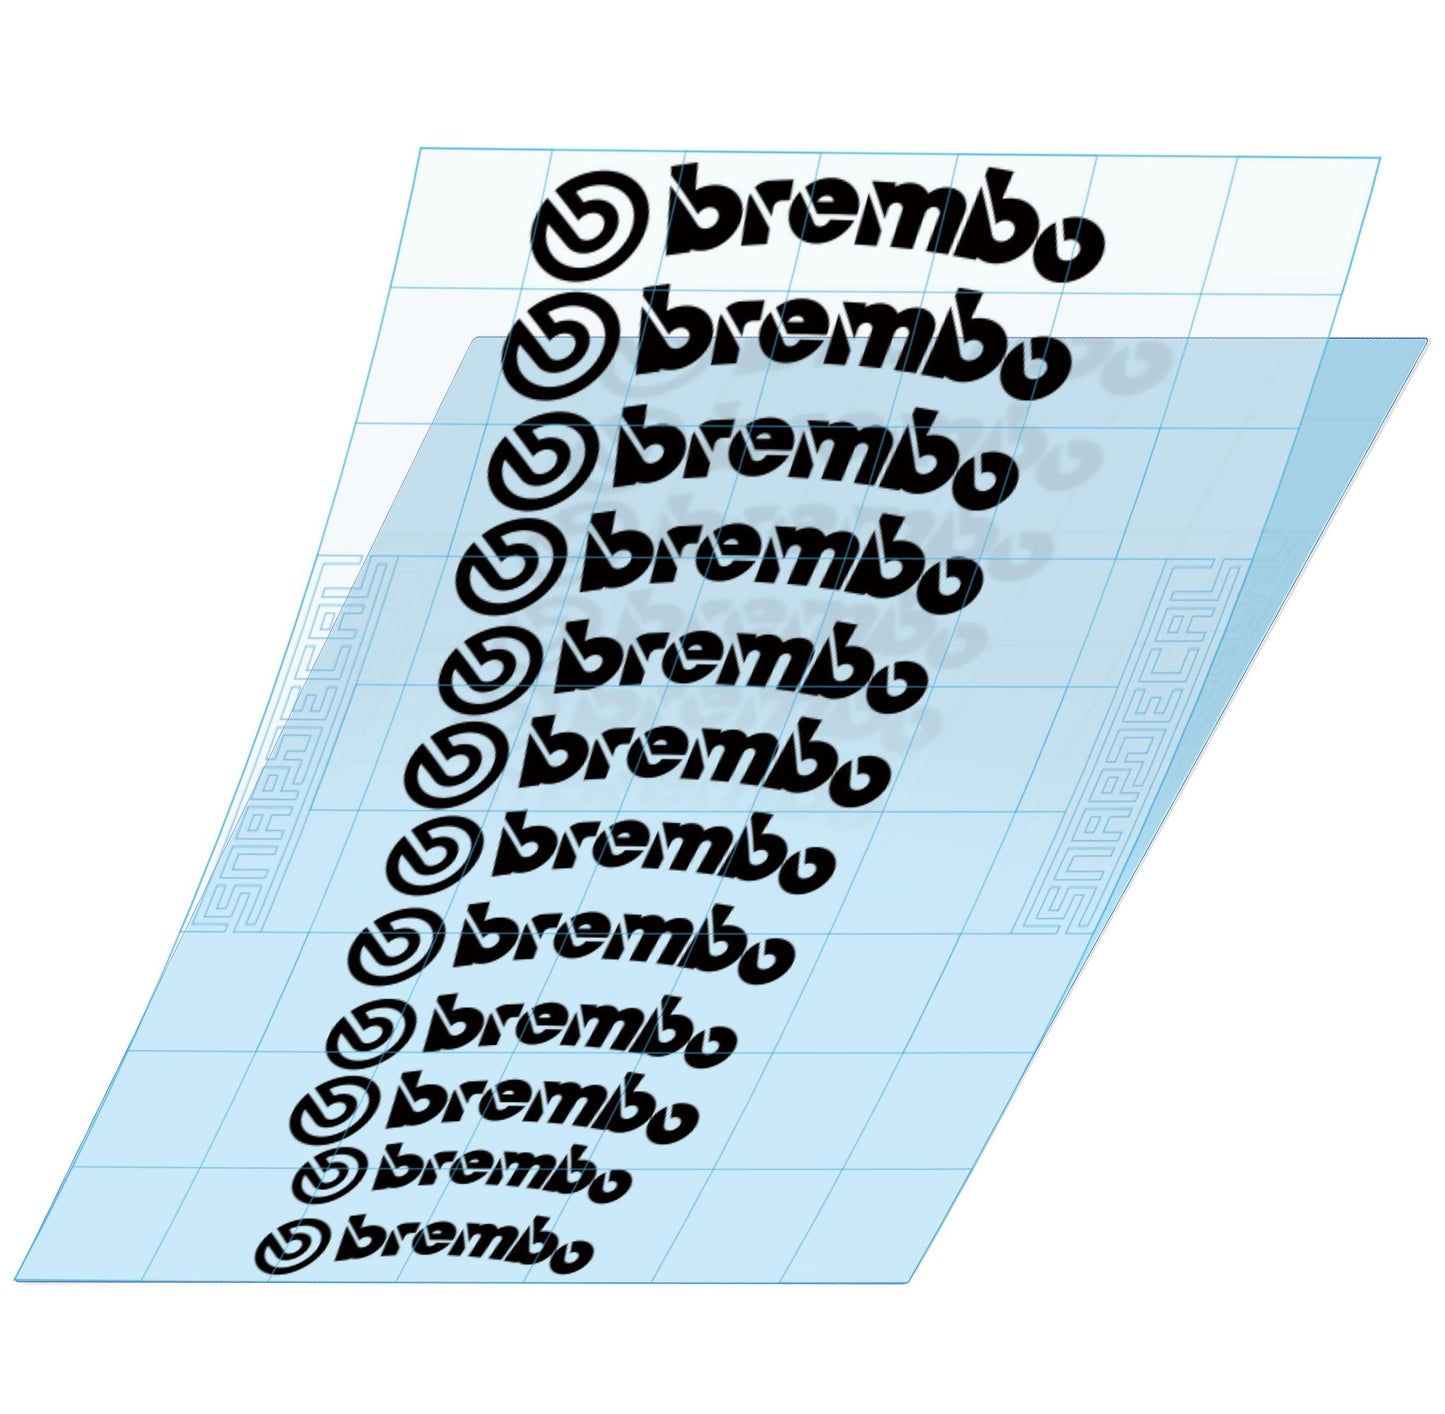 12 Brembo Brake Caliper Decals Curved - Snap Decal